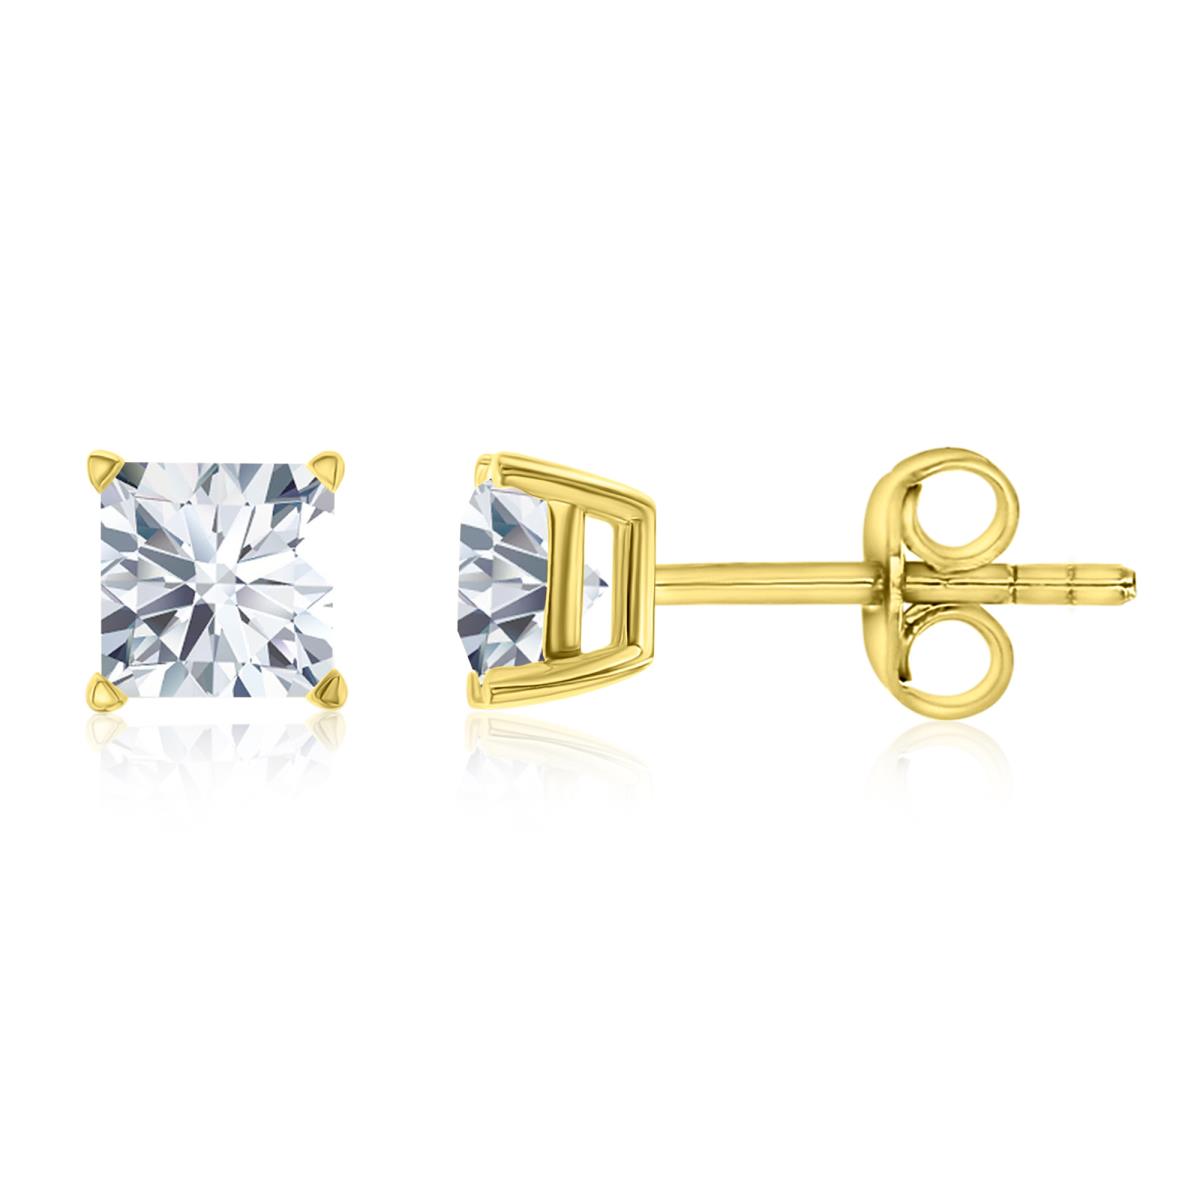 14K Yellow Gold 5mm Square Stud Earring